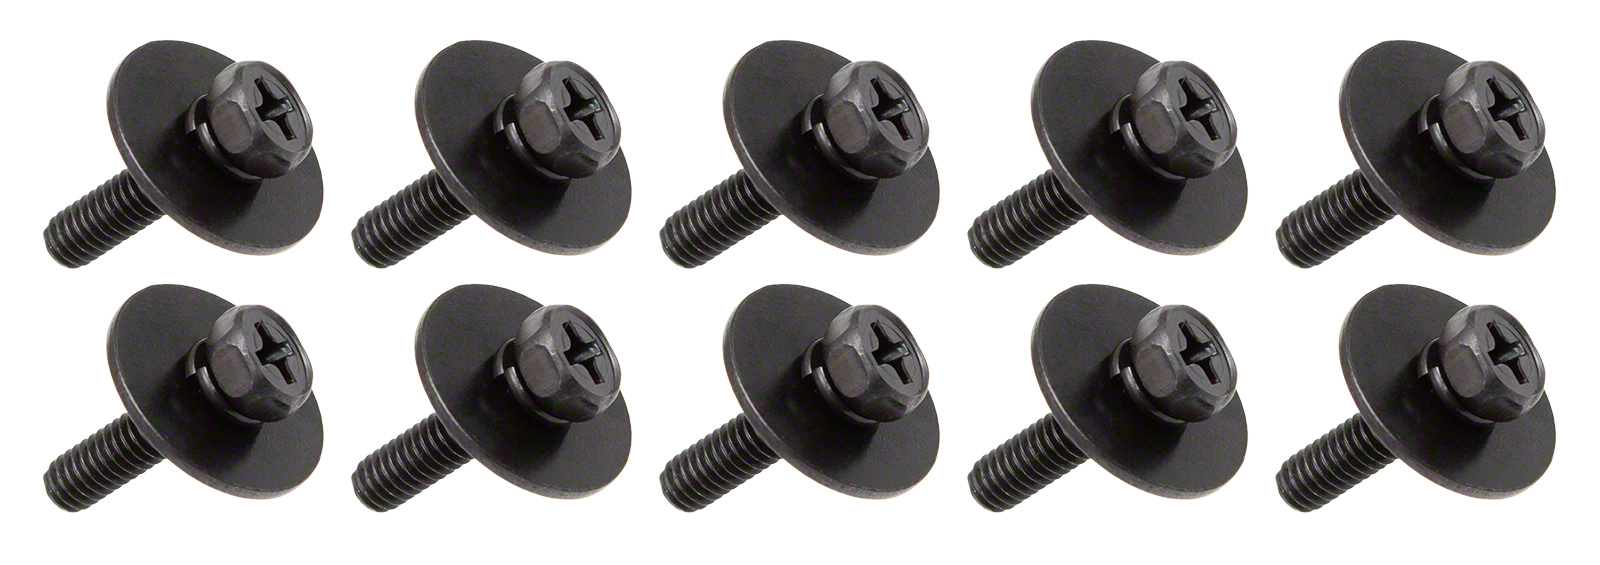 SPAREDRUM WSC4-14BK - M4 14MM - MOUNTING SCREW FOR WOODEN SHELL - BLACK (X10)